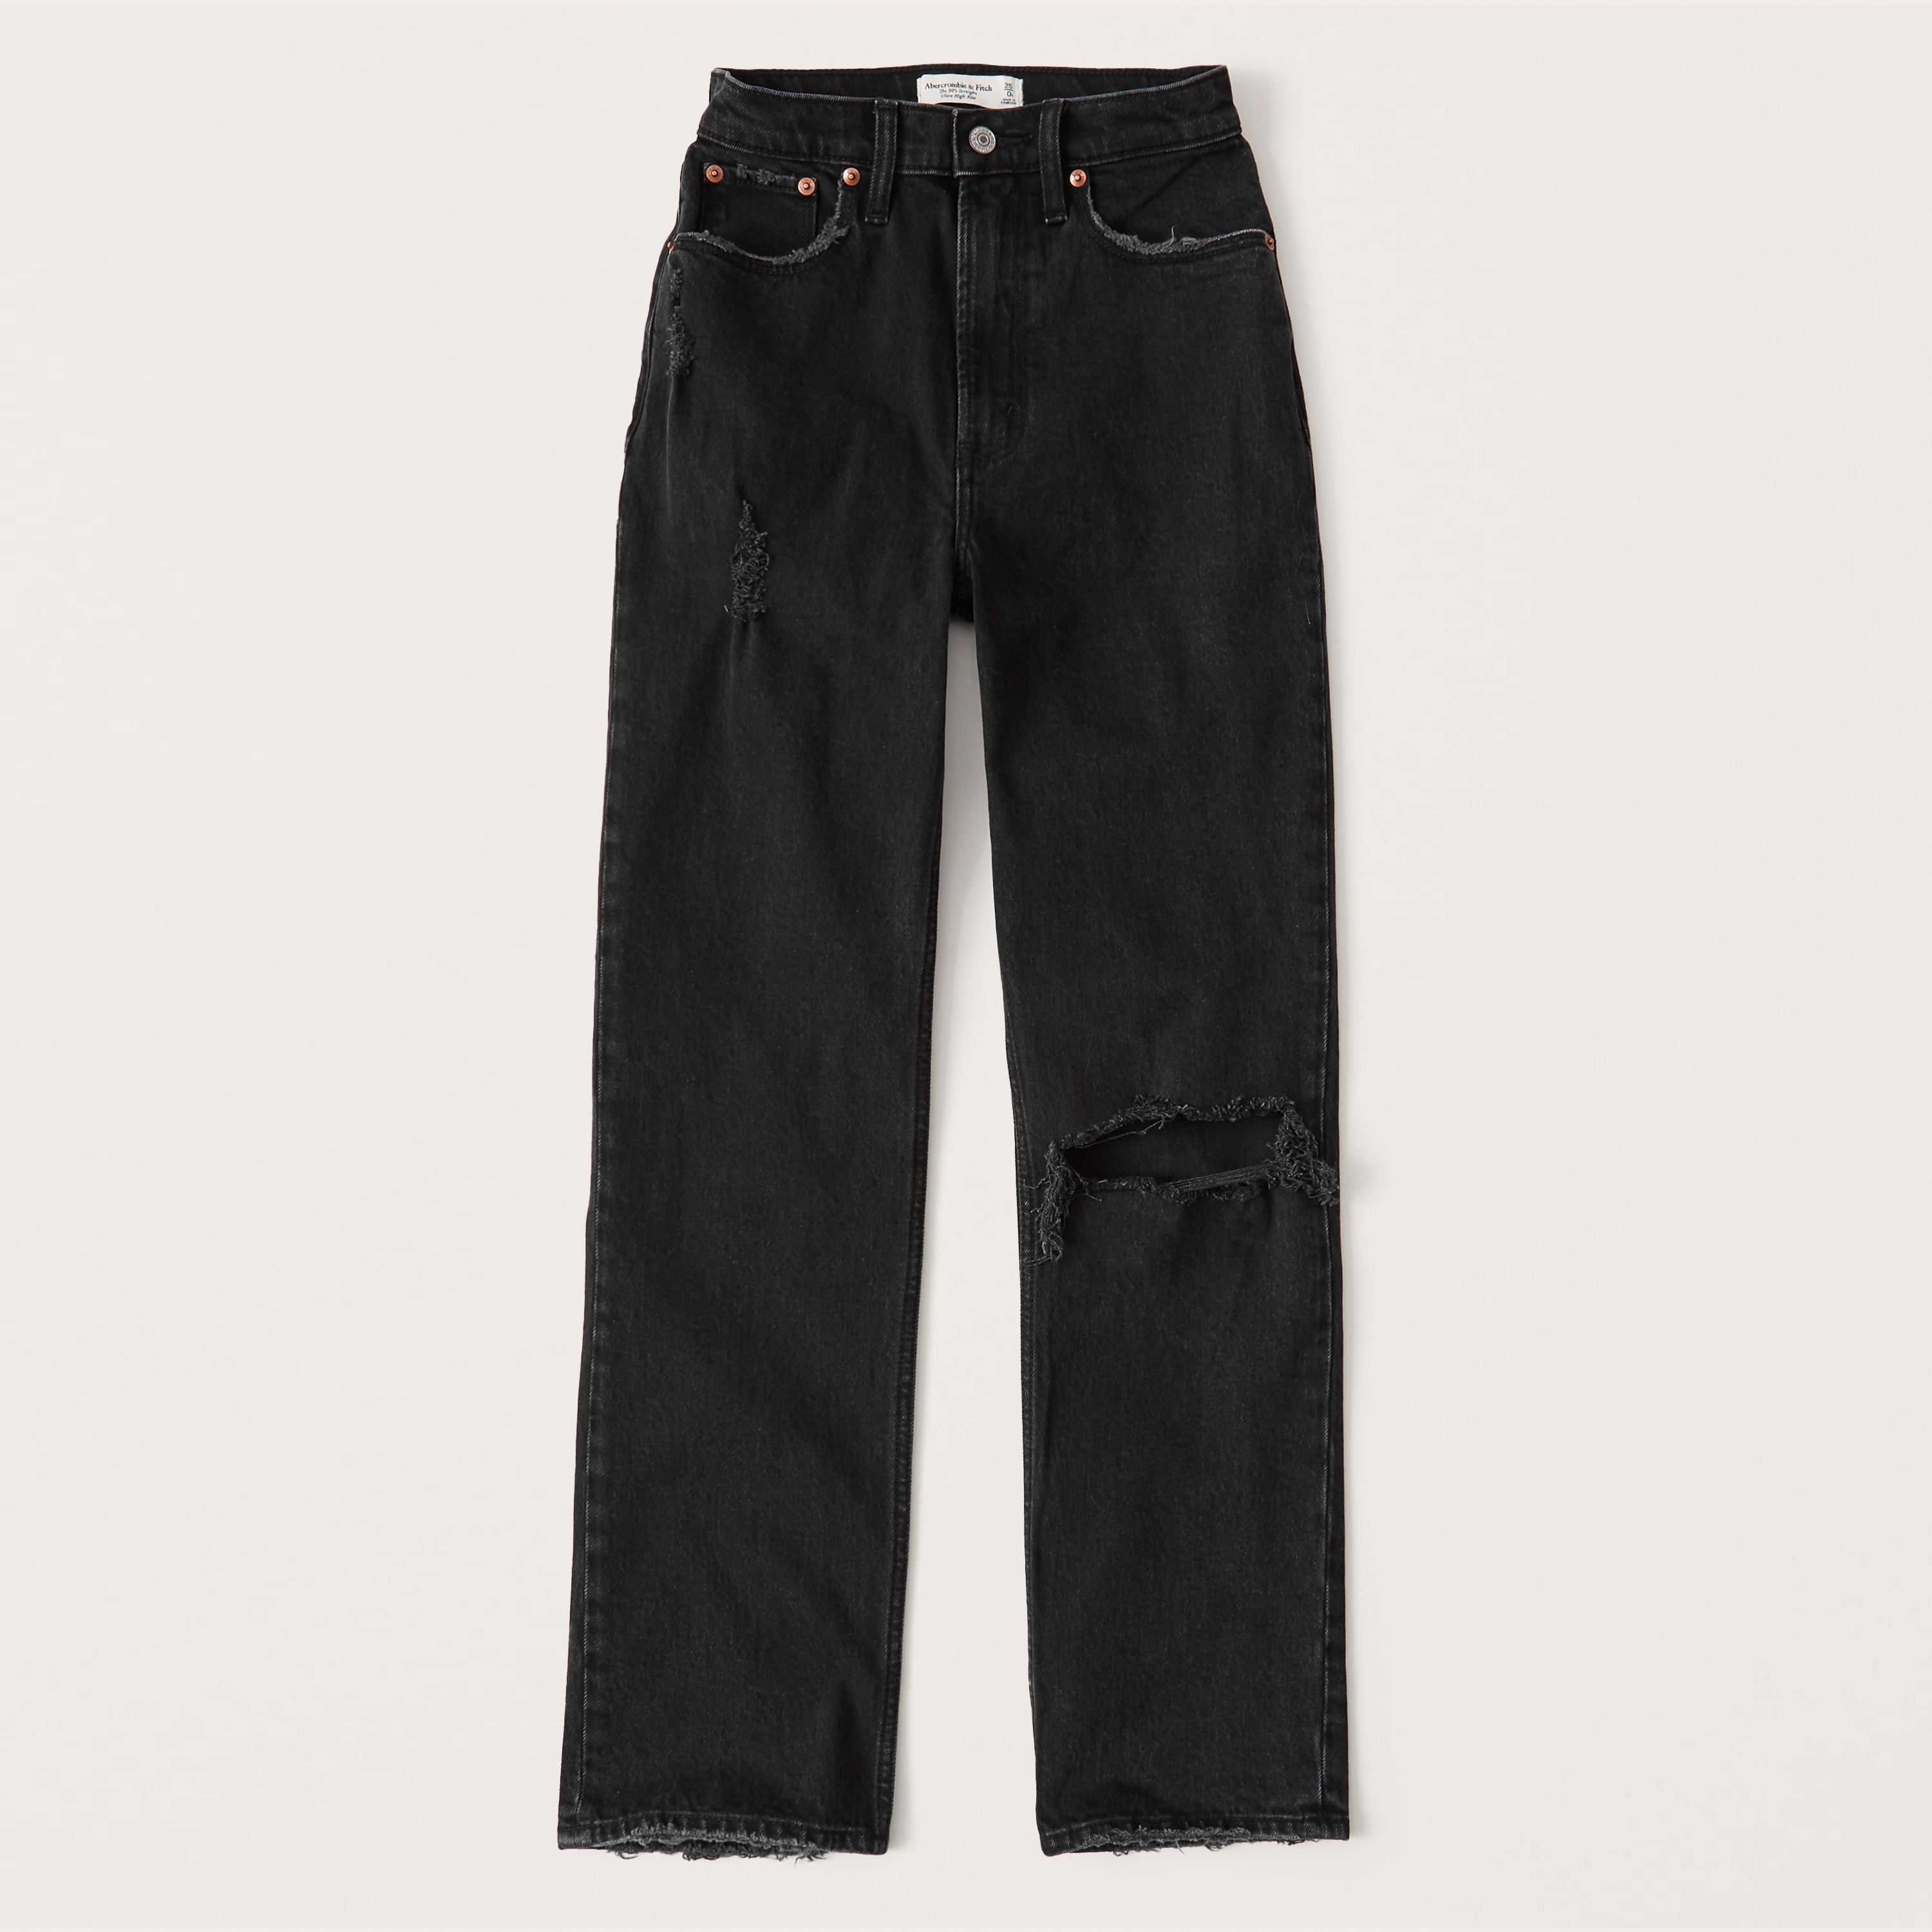 abercrombie and fitch womens jeans